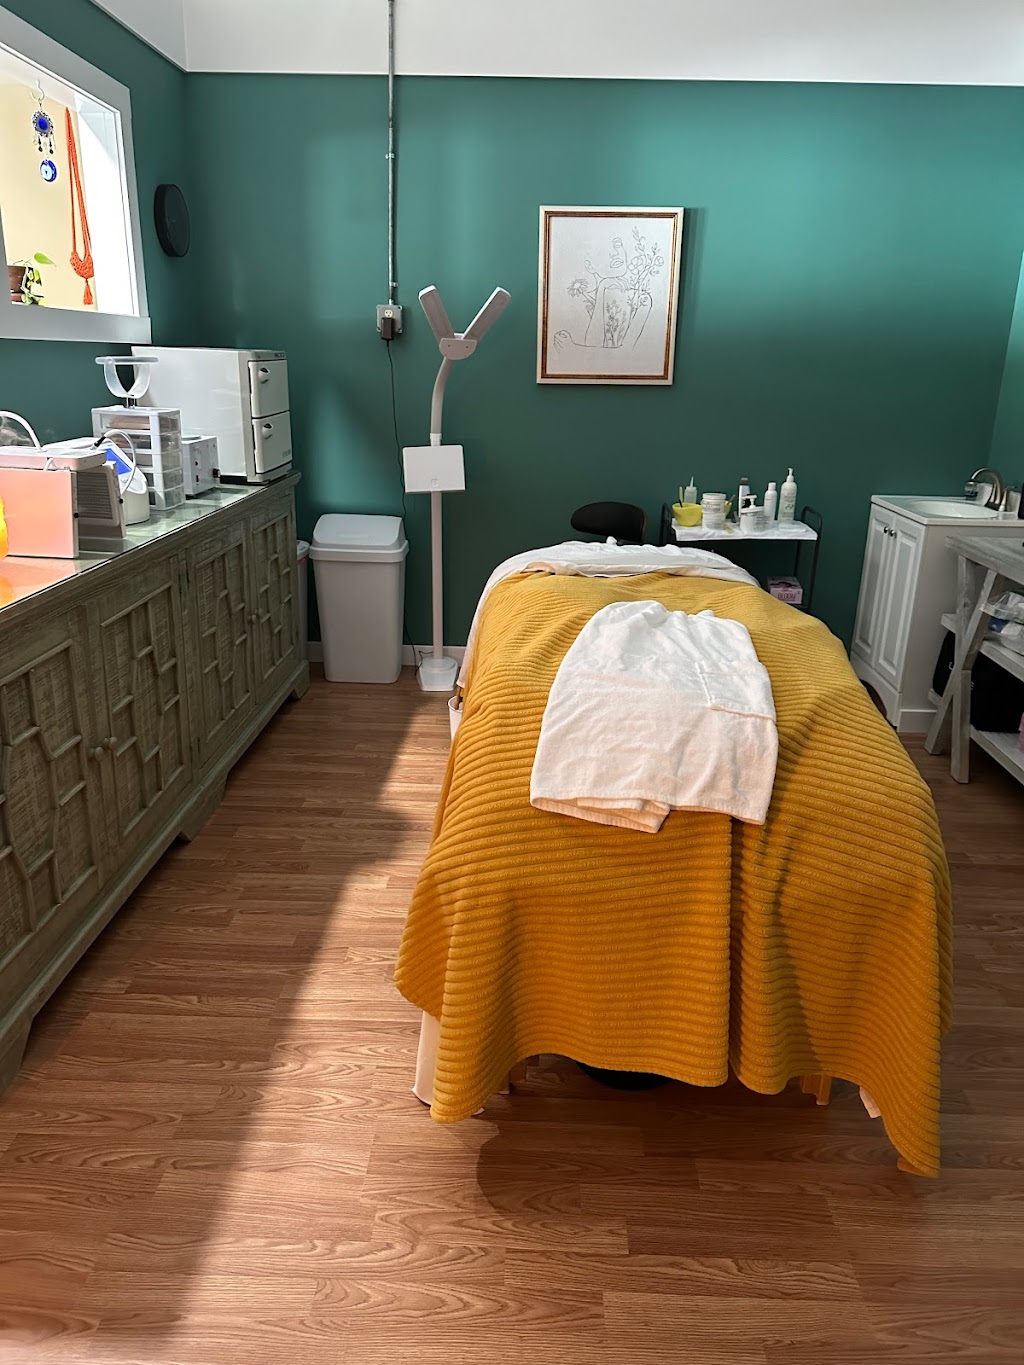 Ginger Roots Skin Bar | 535 College Hwy Suite C, Southwick, MA 01077 | Phone: (413) 523-9101